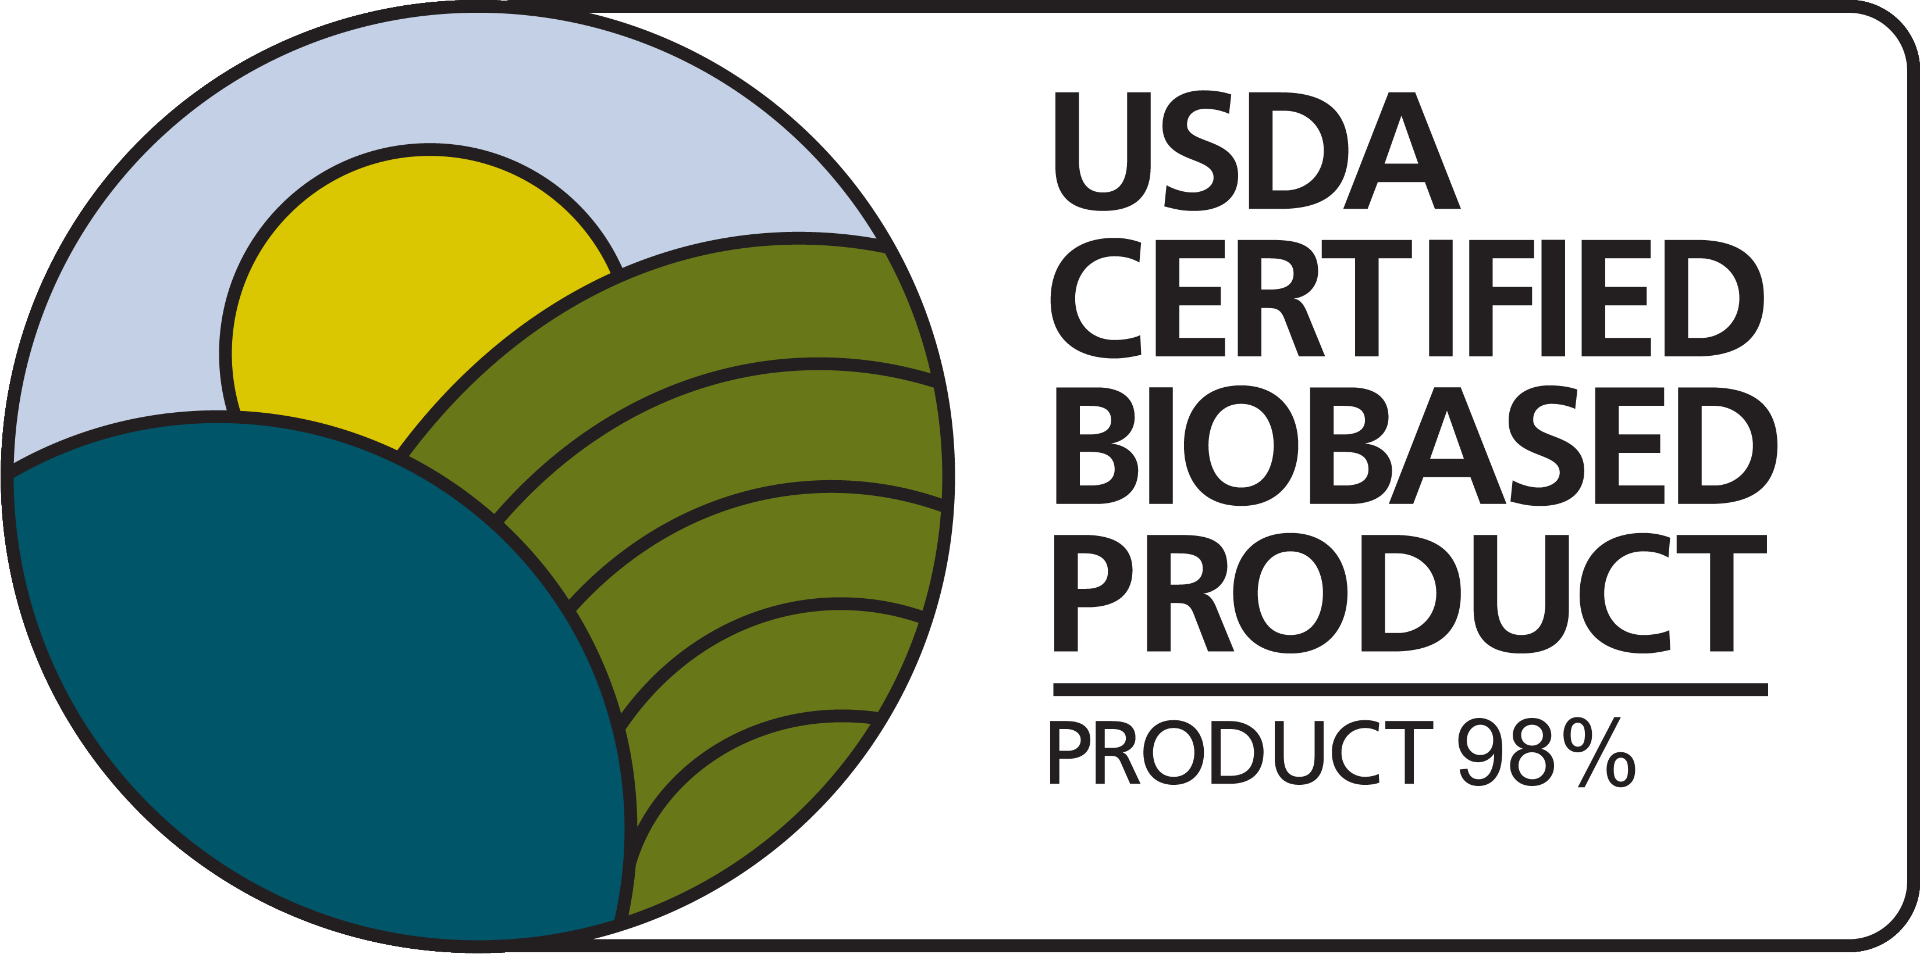 USDA certified biobased product - Product 98%